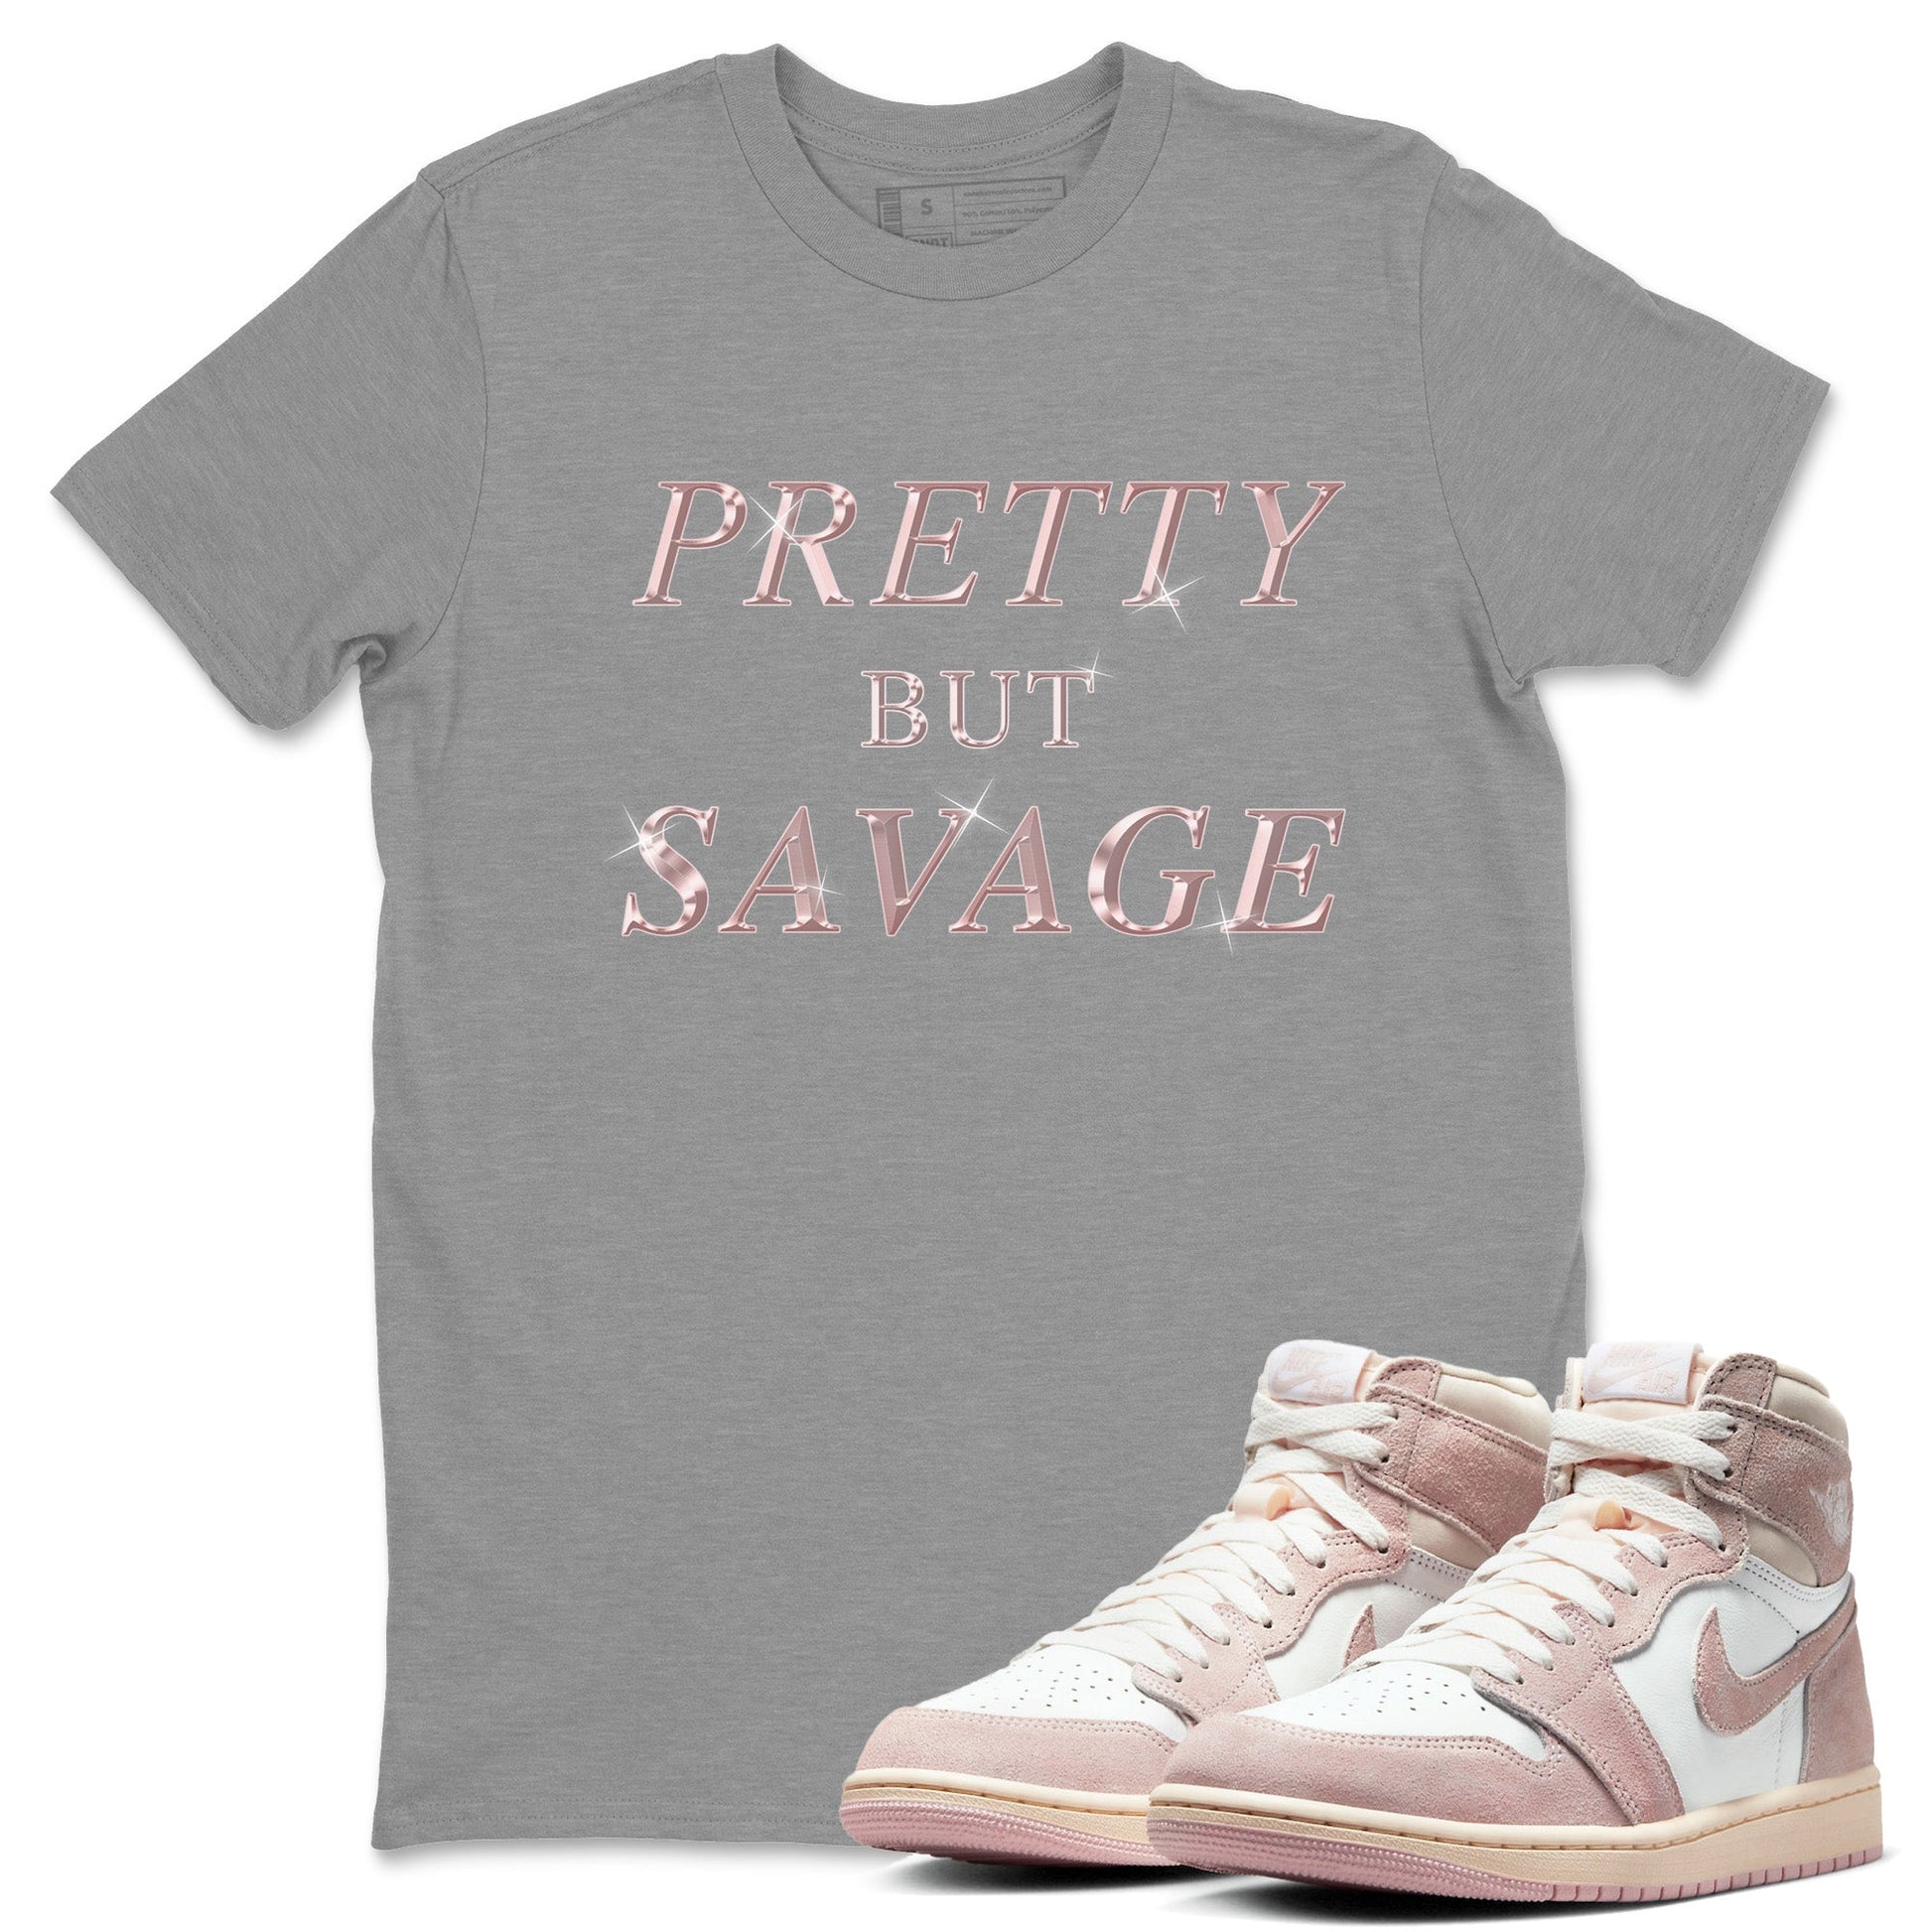 Air Jordan 1 Washed Pink Pretty But Savage Crew Neck Sneaker Tees AJ1 Retro High OG Washed Pink Sneaker T-Shirts Size Chart